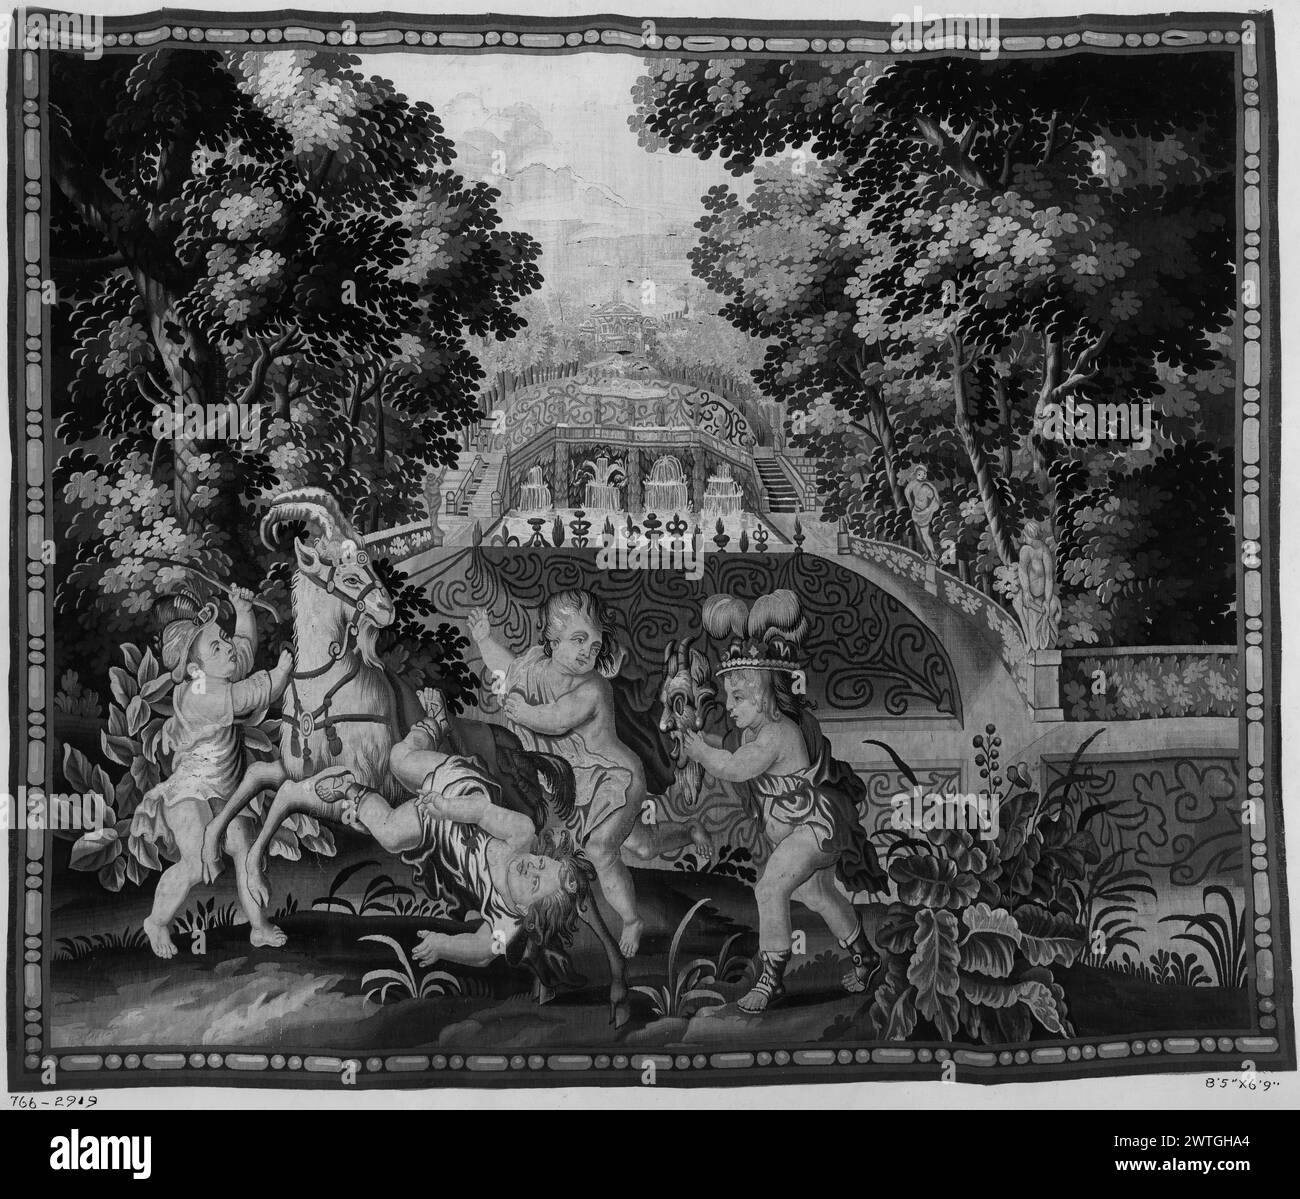 Bacchanalian children. unknown c. 1690 Tapestry Dimensions: H 6'9' x W 8'5' Tapestry Materials/Techniques: unknown Culture: English Weaving Center: Mortlake Ownership History: French & Co. purchased from De Souhami 5/5/1916. 4 boys playing with goat 1 tumbling off, 1 wears Indian-style headdress & holds mask (foreground), stylized garden with fountains & architectural scene (background) (BRD) bead-&-reel molding Marillier discusses a set of 7 panels at Cotehele in which this tapestry matches the description (see pl. 10b). He also identifies 2 other copies: 1 belonged to Mrs. Fetherston-Godly, Stock Photo